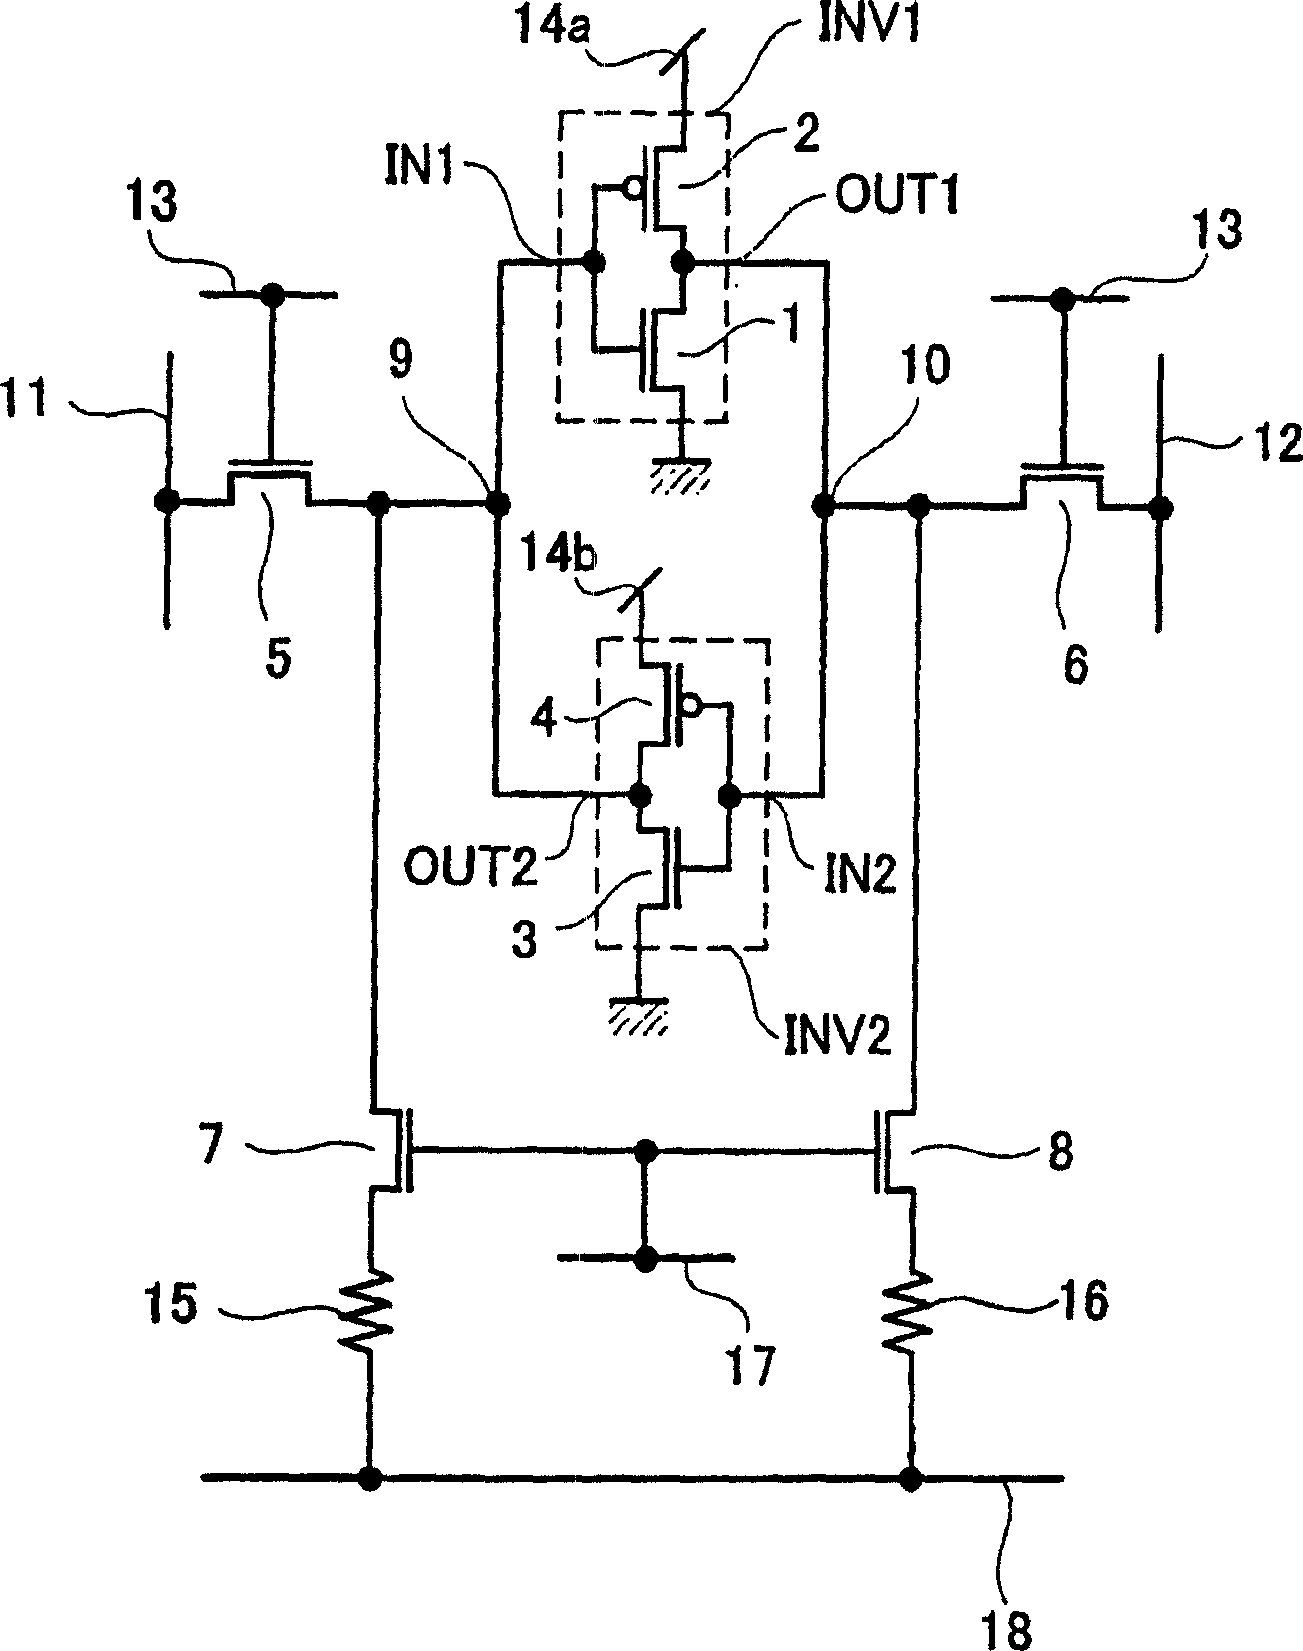 Method of driving a non-volatile flip-flop circuit using variable resistor elements